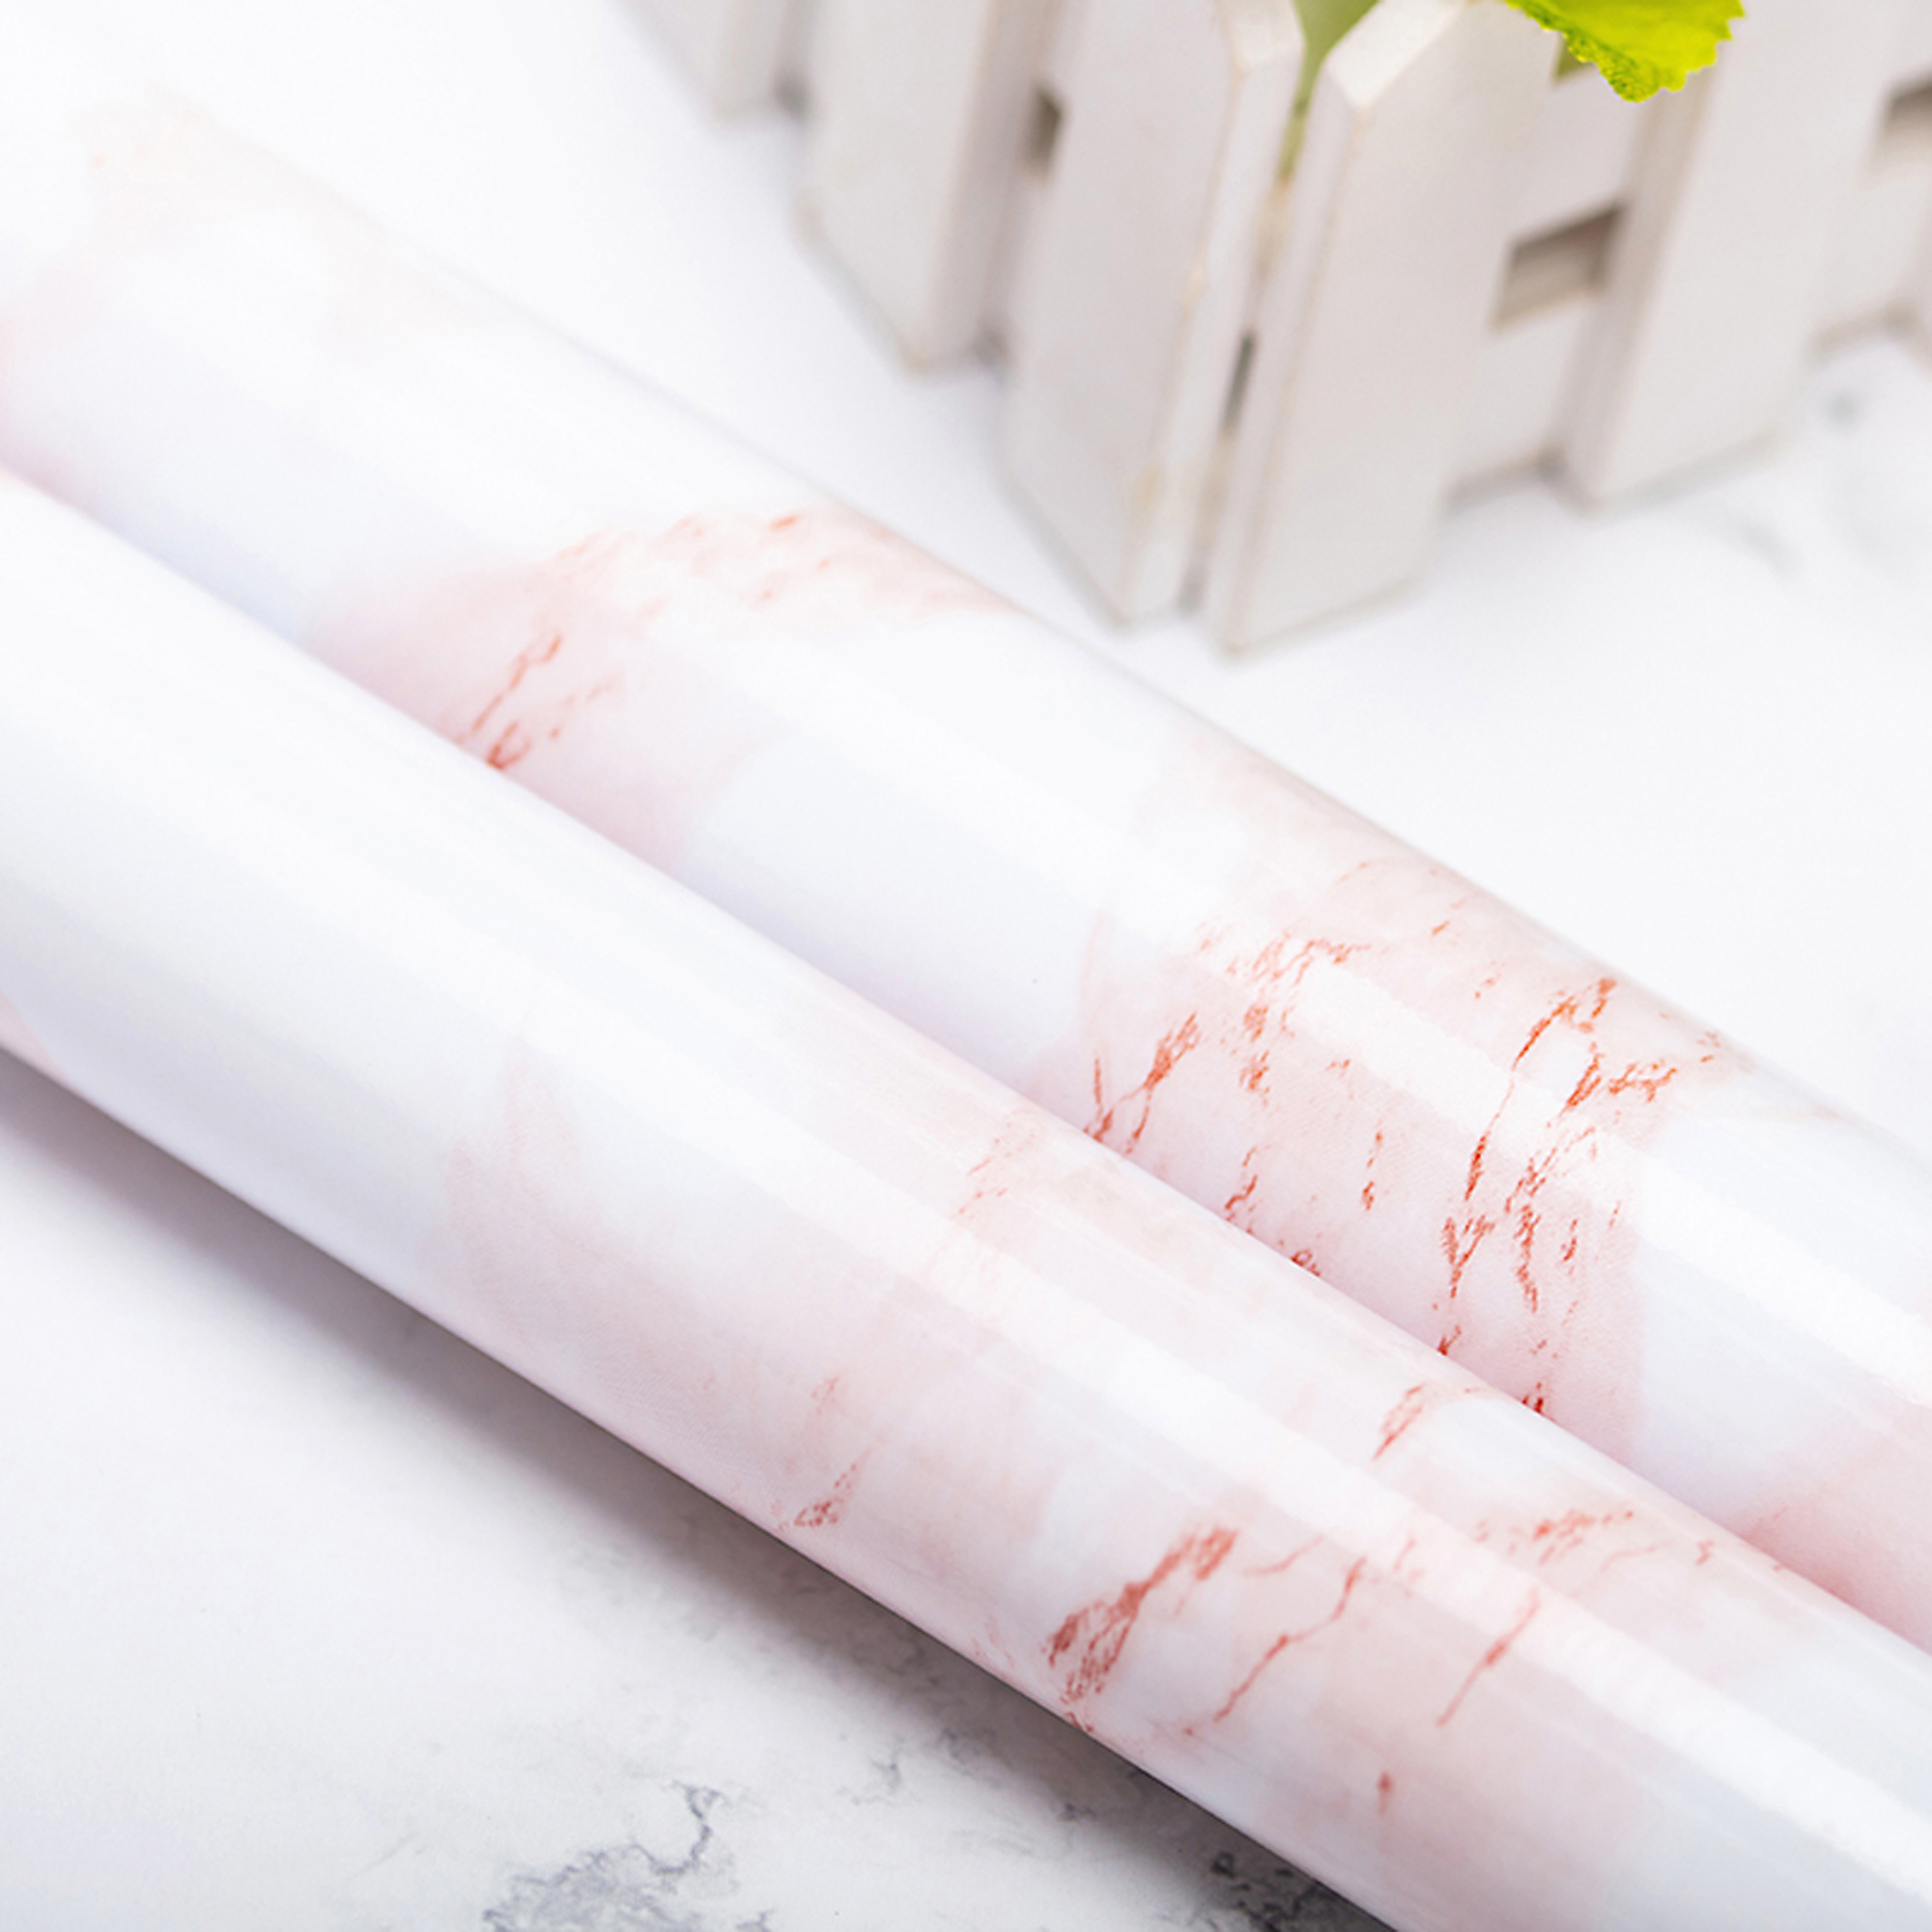 LELINTA Self Adhesive Wallpaper, PVC Marble Effect Removable Contact Wallpaper Self Adhesive Peel Stick Rolling Paper Home Studio Decoration Wall Stickers Upgrade Wallpaper/Thicker Version - image 1 of 8